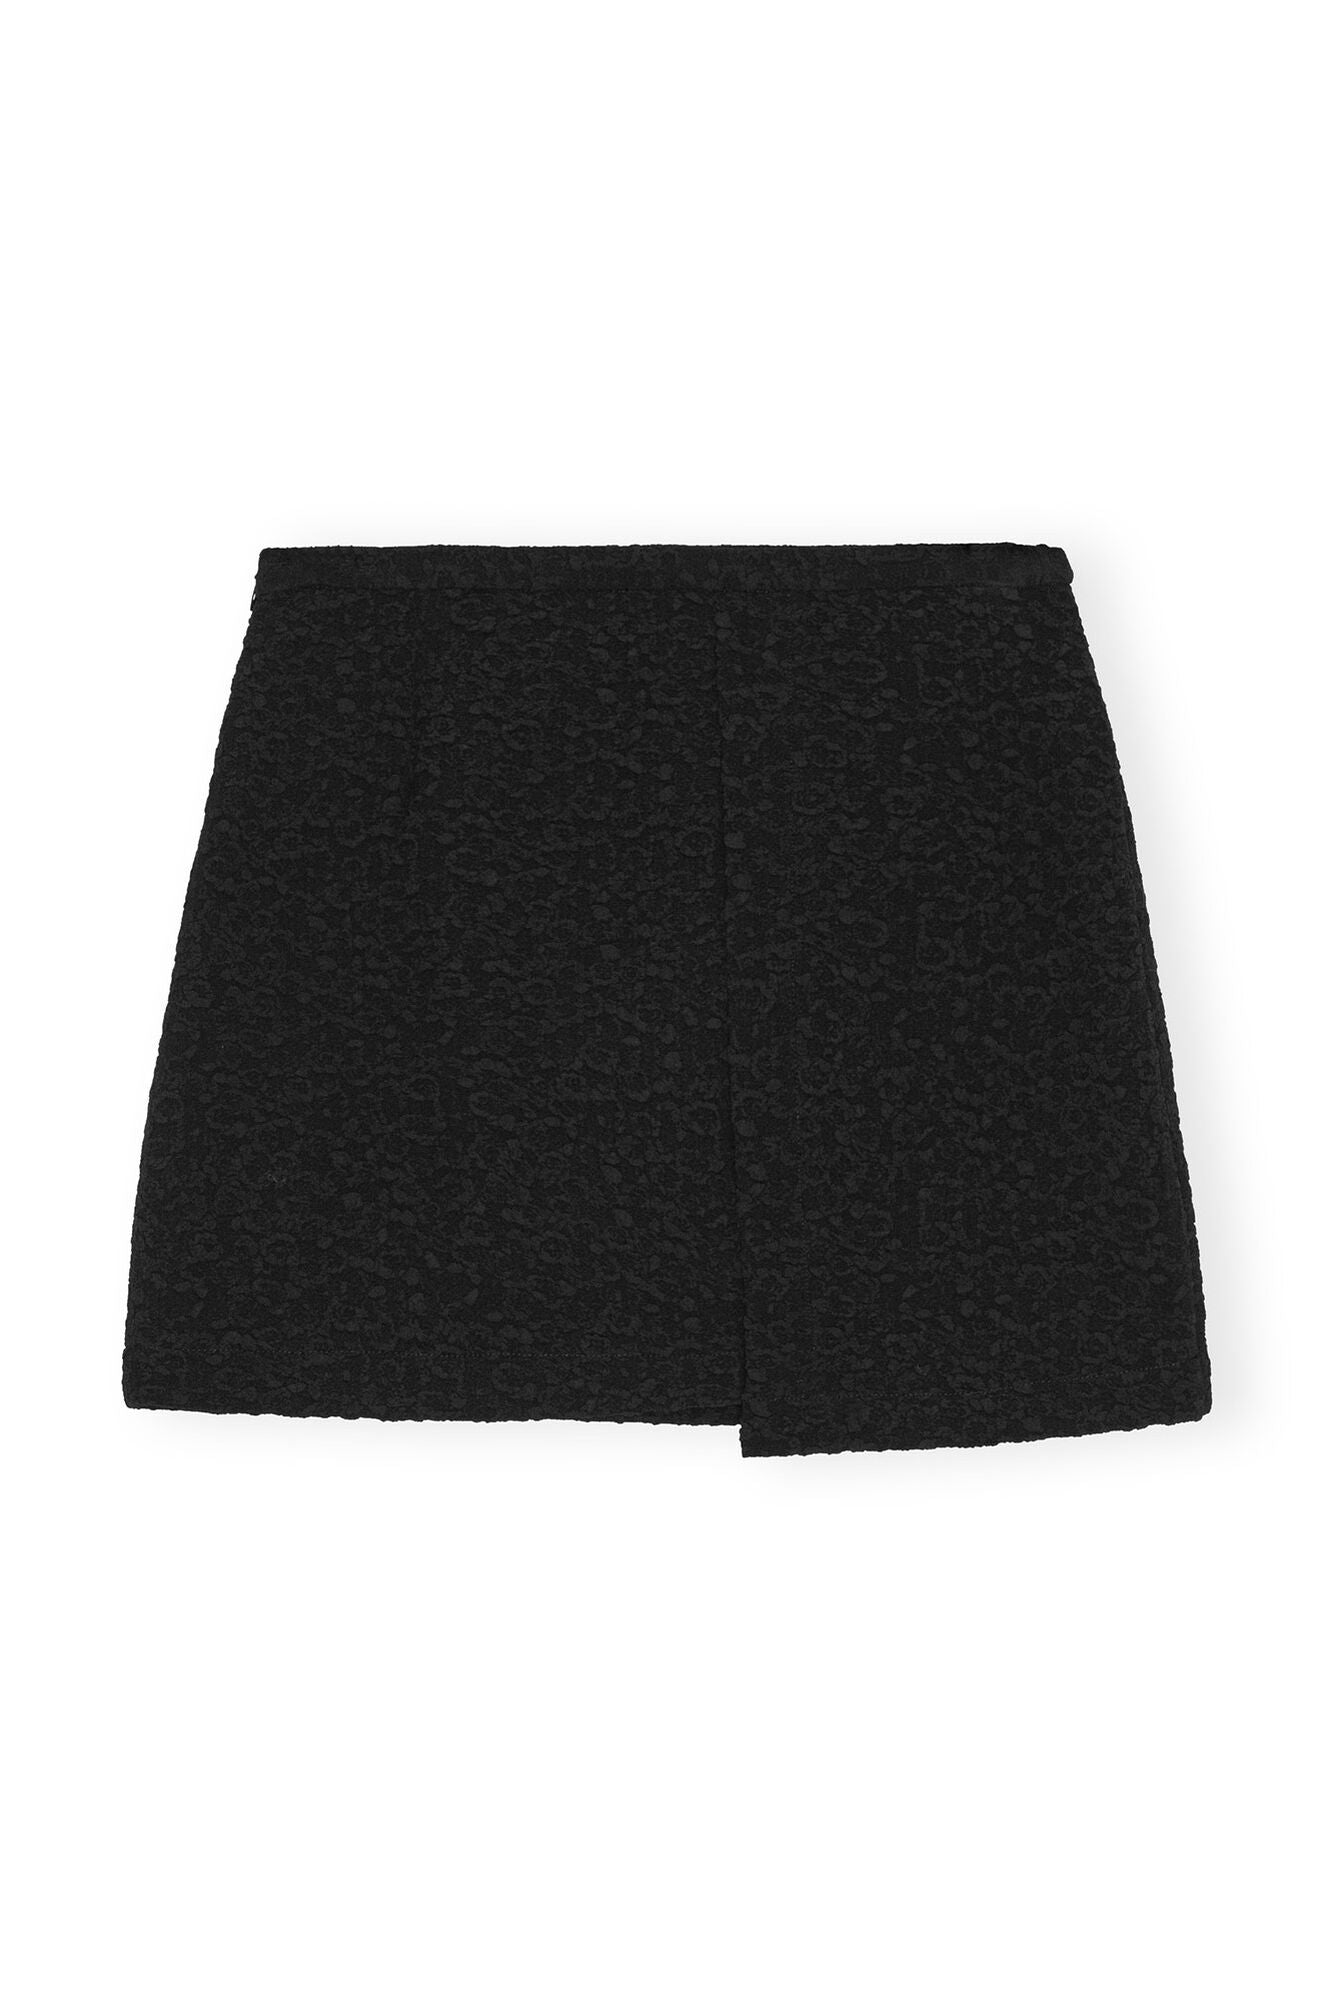 TEXTURED SUITING MINI SKIRT IN BLACK - Romi Boutique